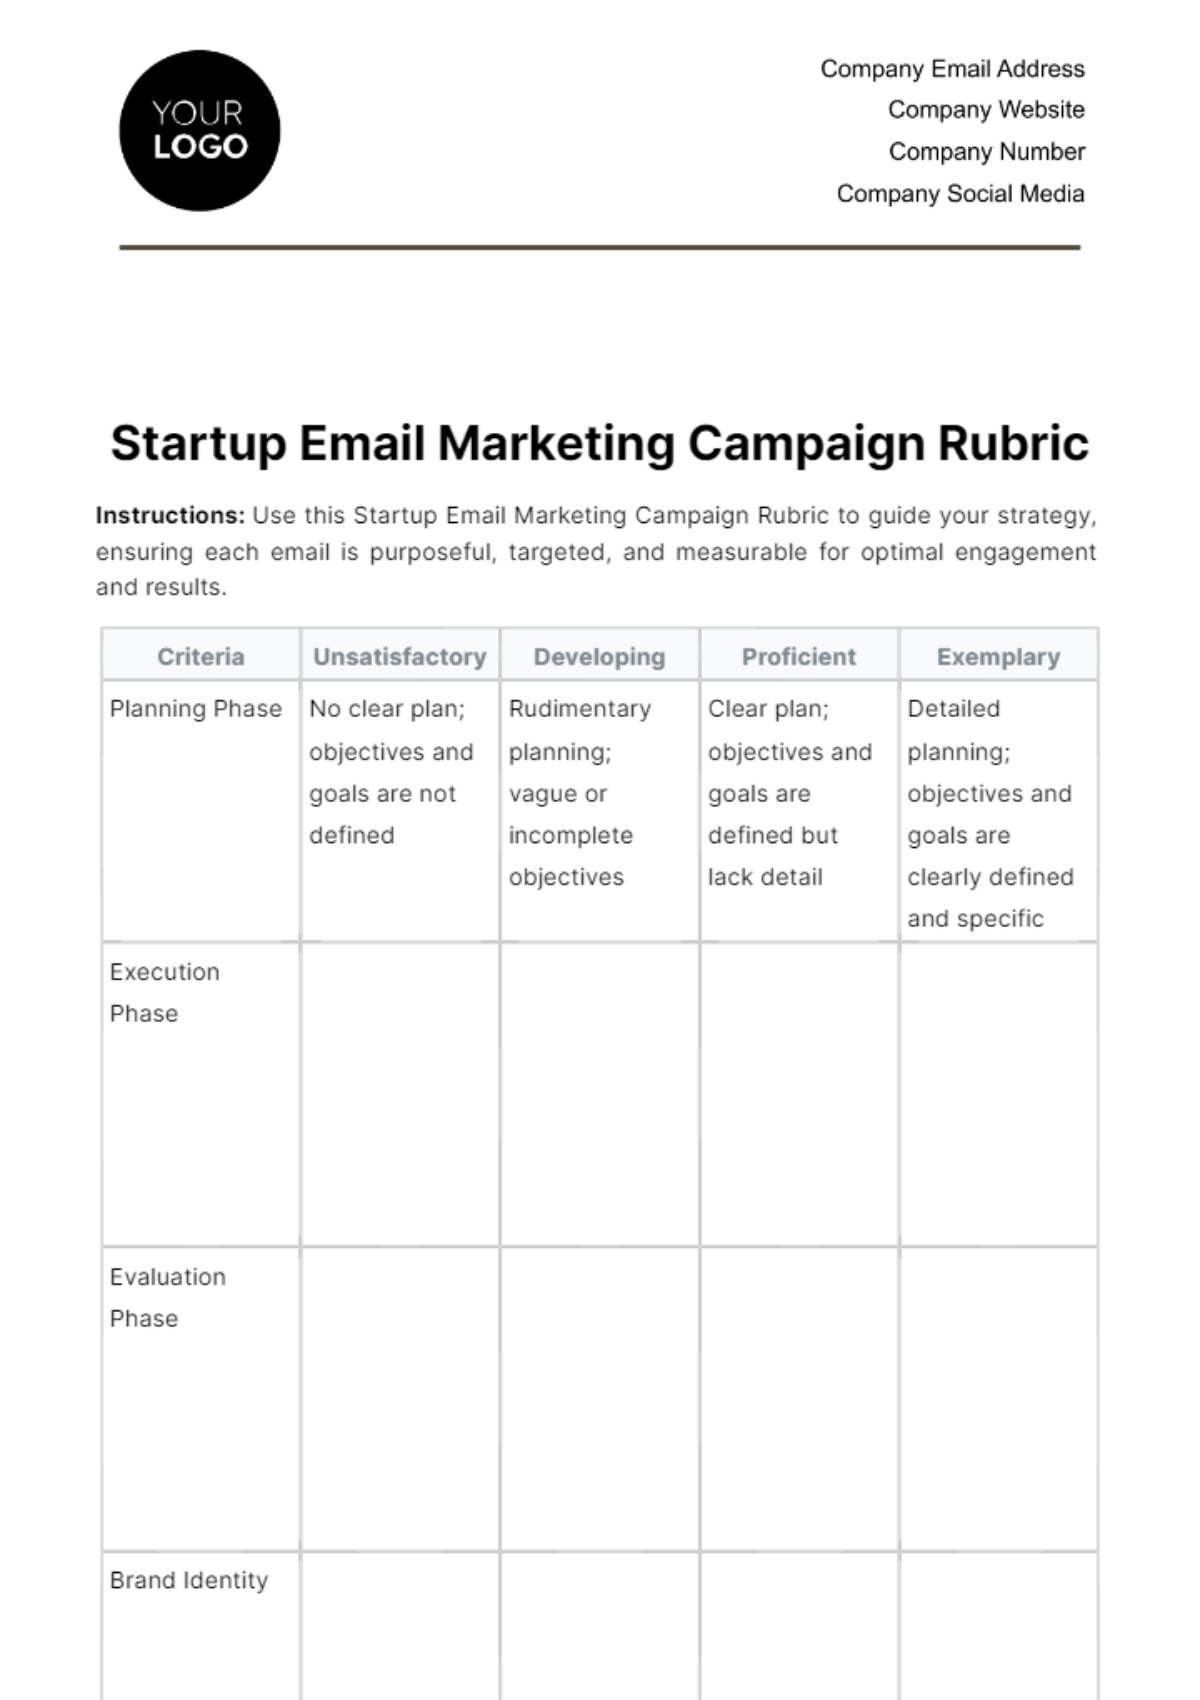 Startup Email Marketing Campaign Rubric Template